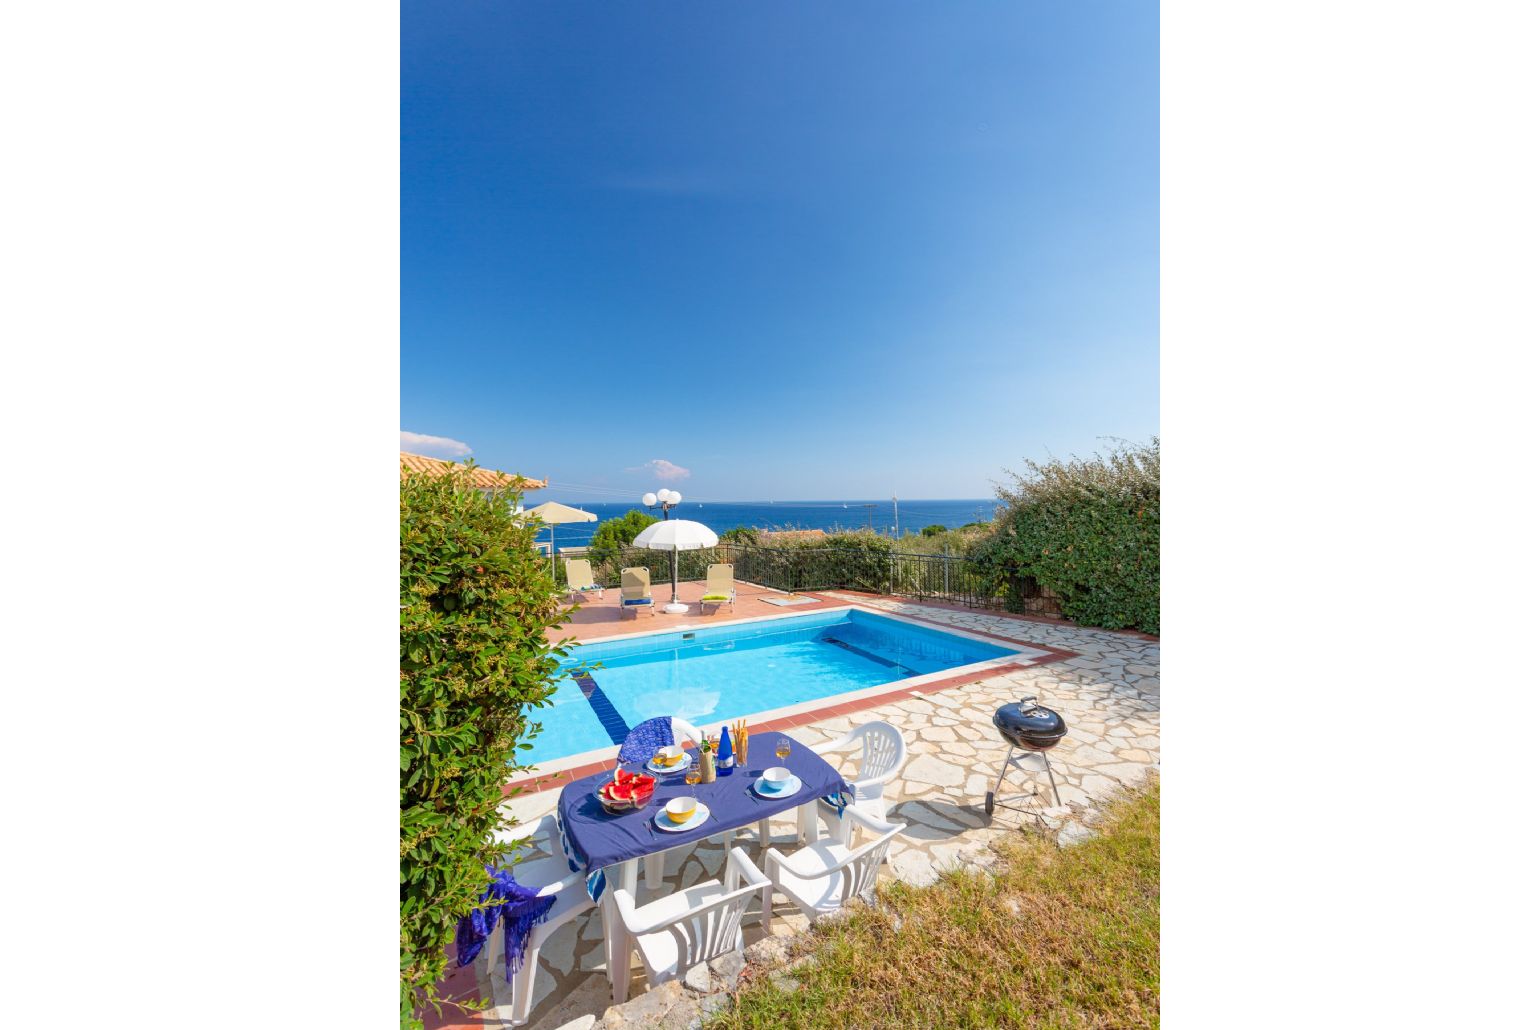 Private pool and terrace area with sea views